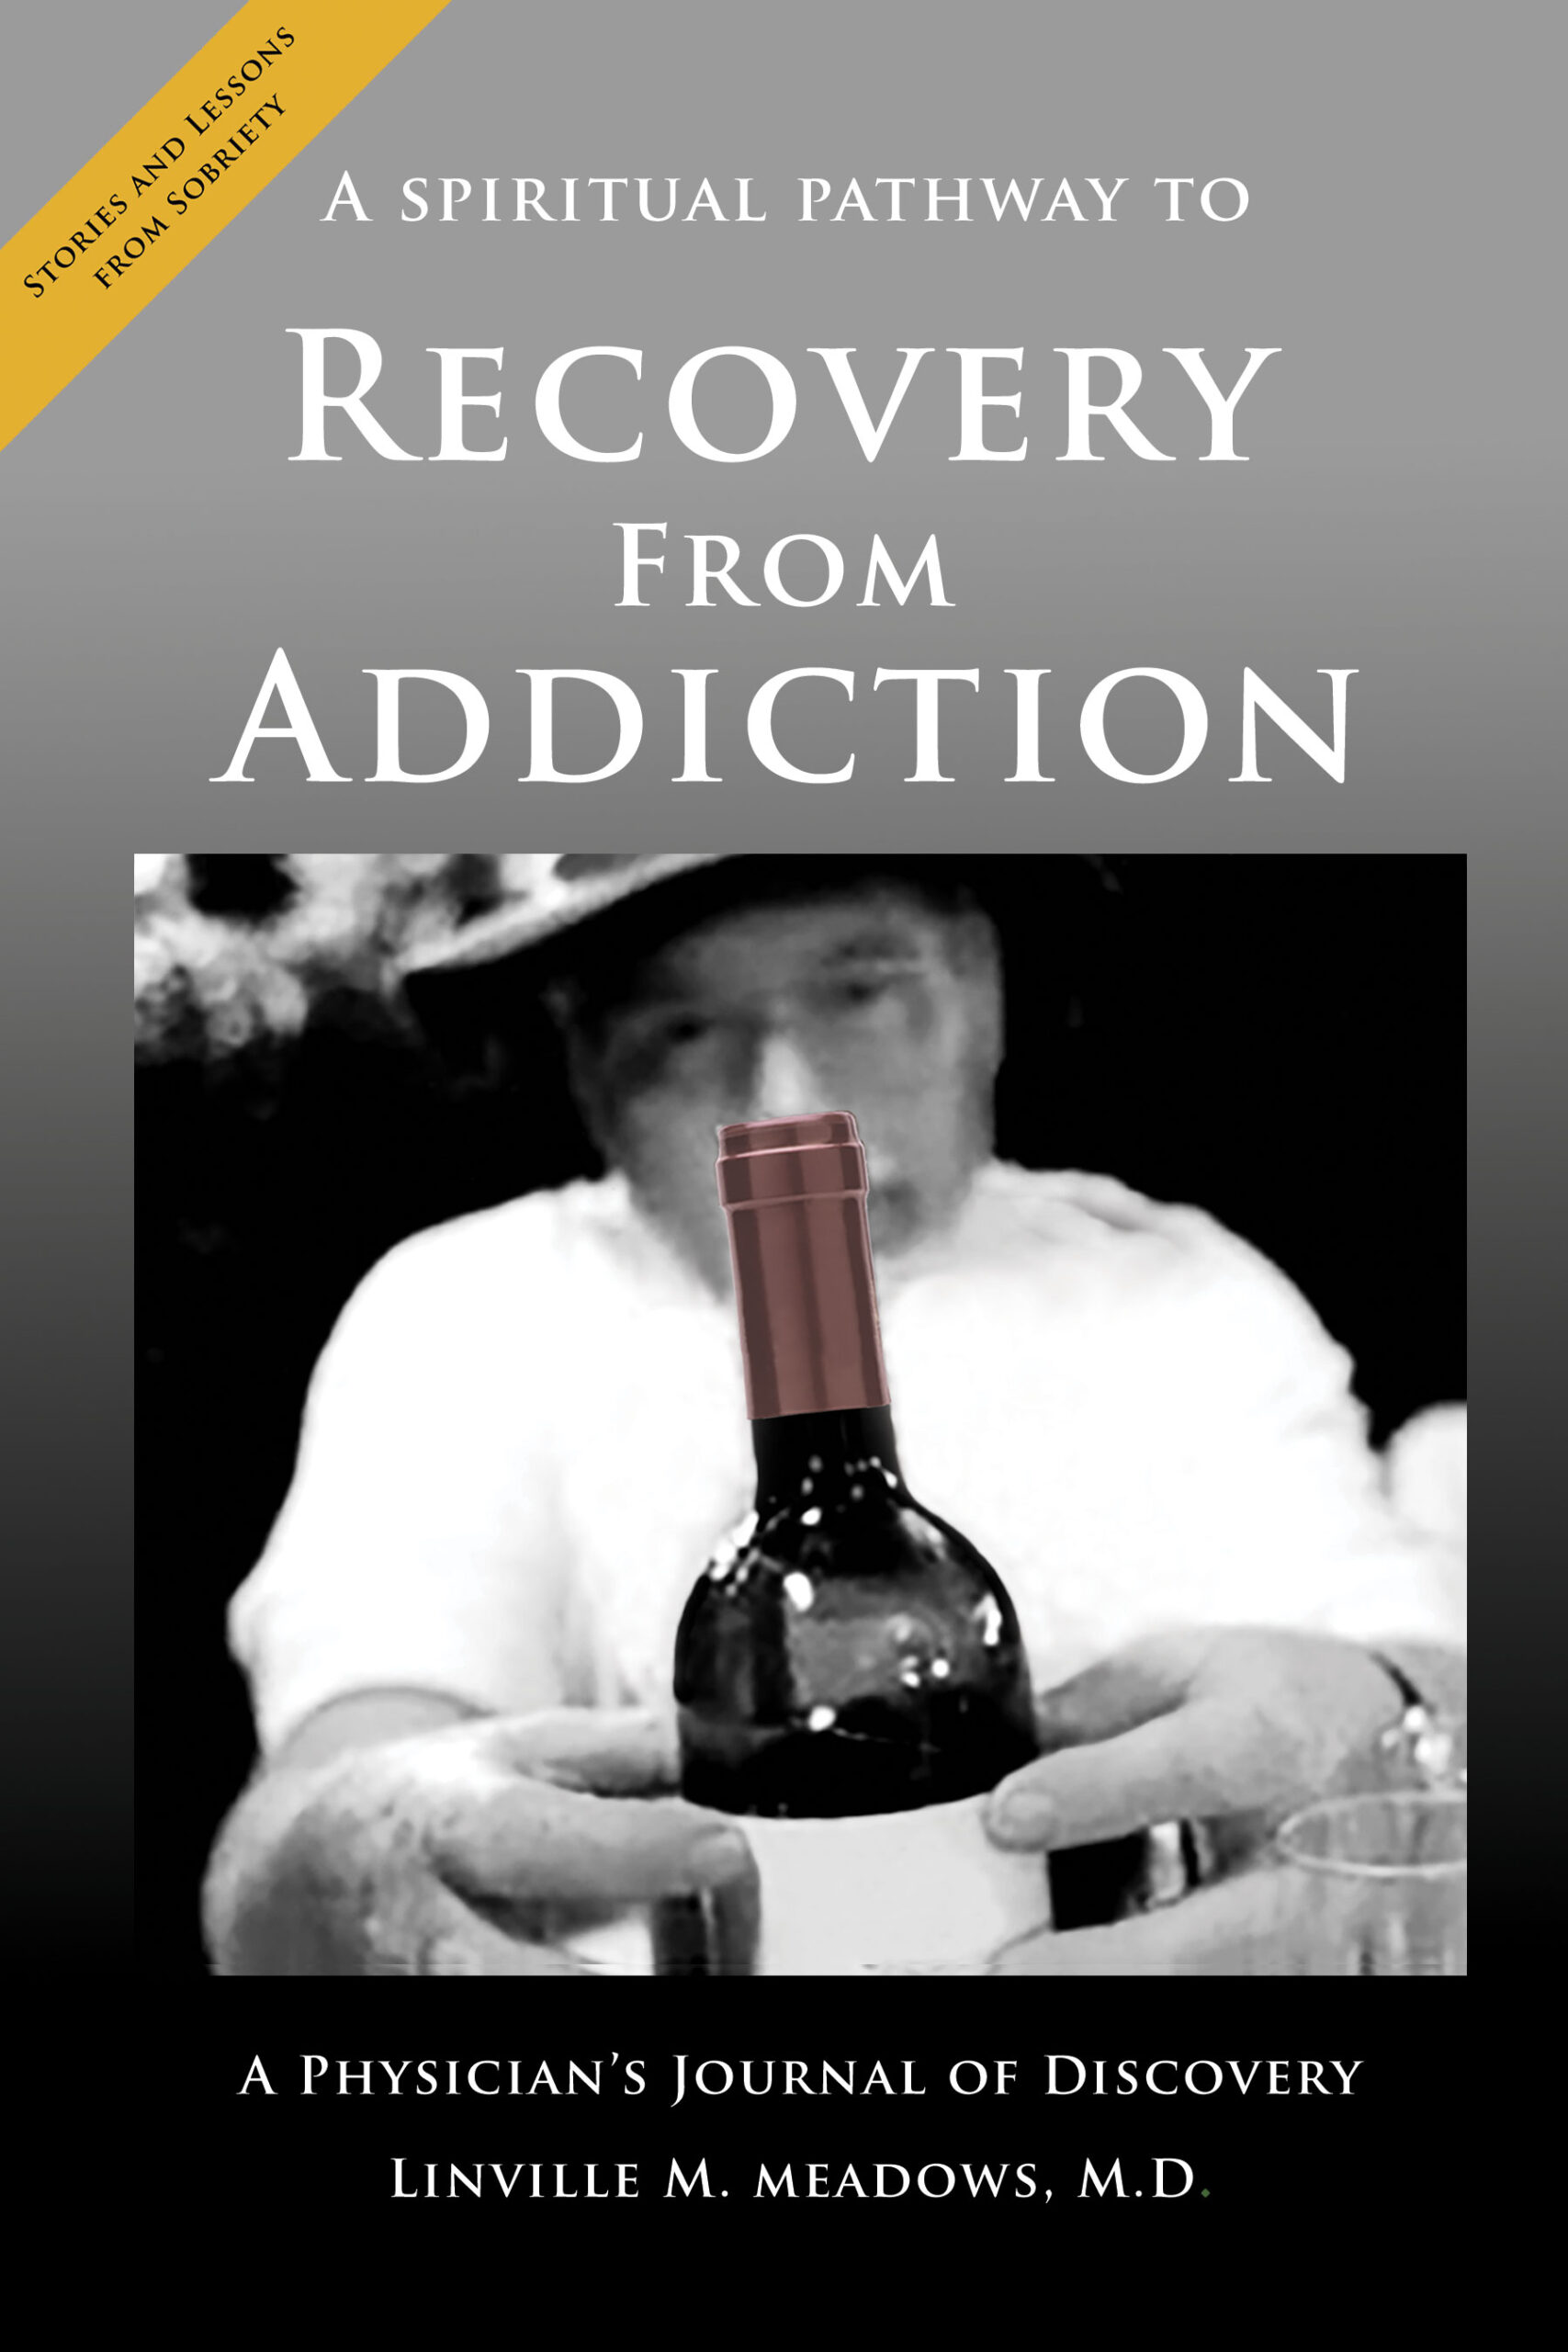 FREE: A Spiritual Pathway to Recovery from Addiction, A Physician’s Journal of Discovery by Linville M Meadows, M.D.